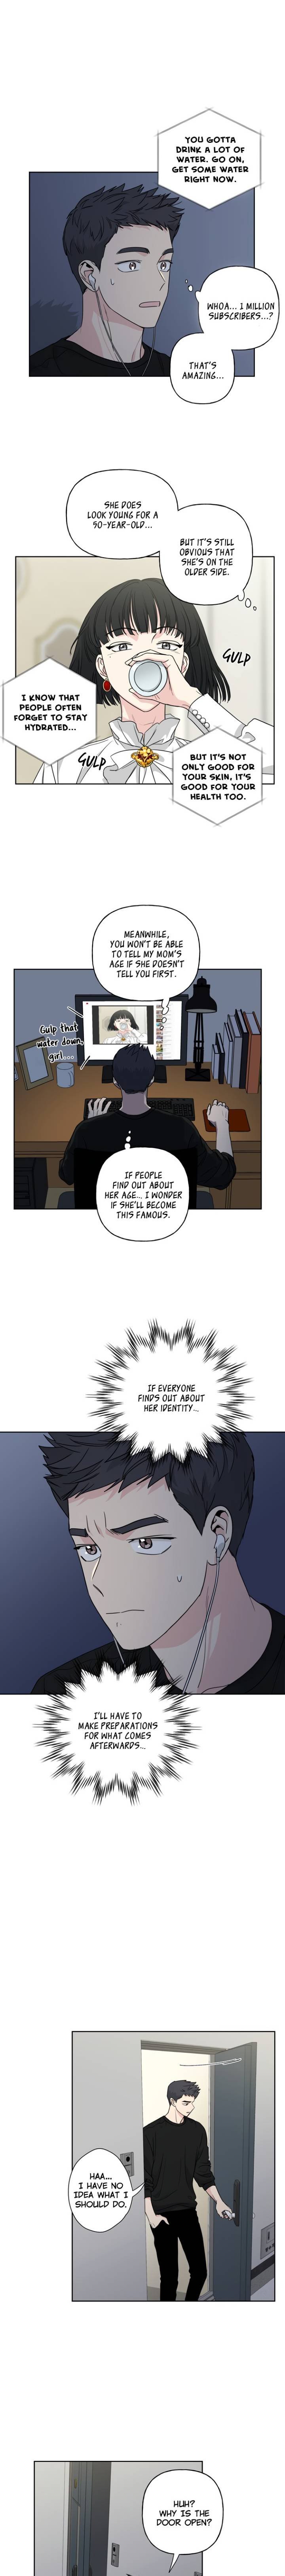 mother-im-sorry-chap-35-4